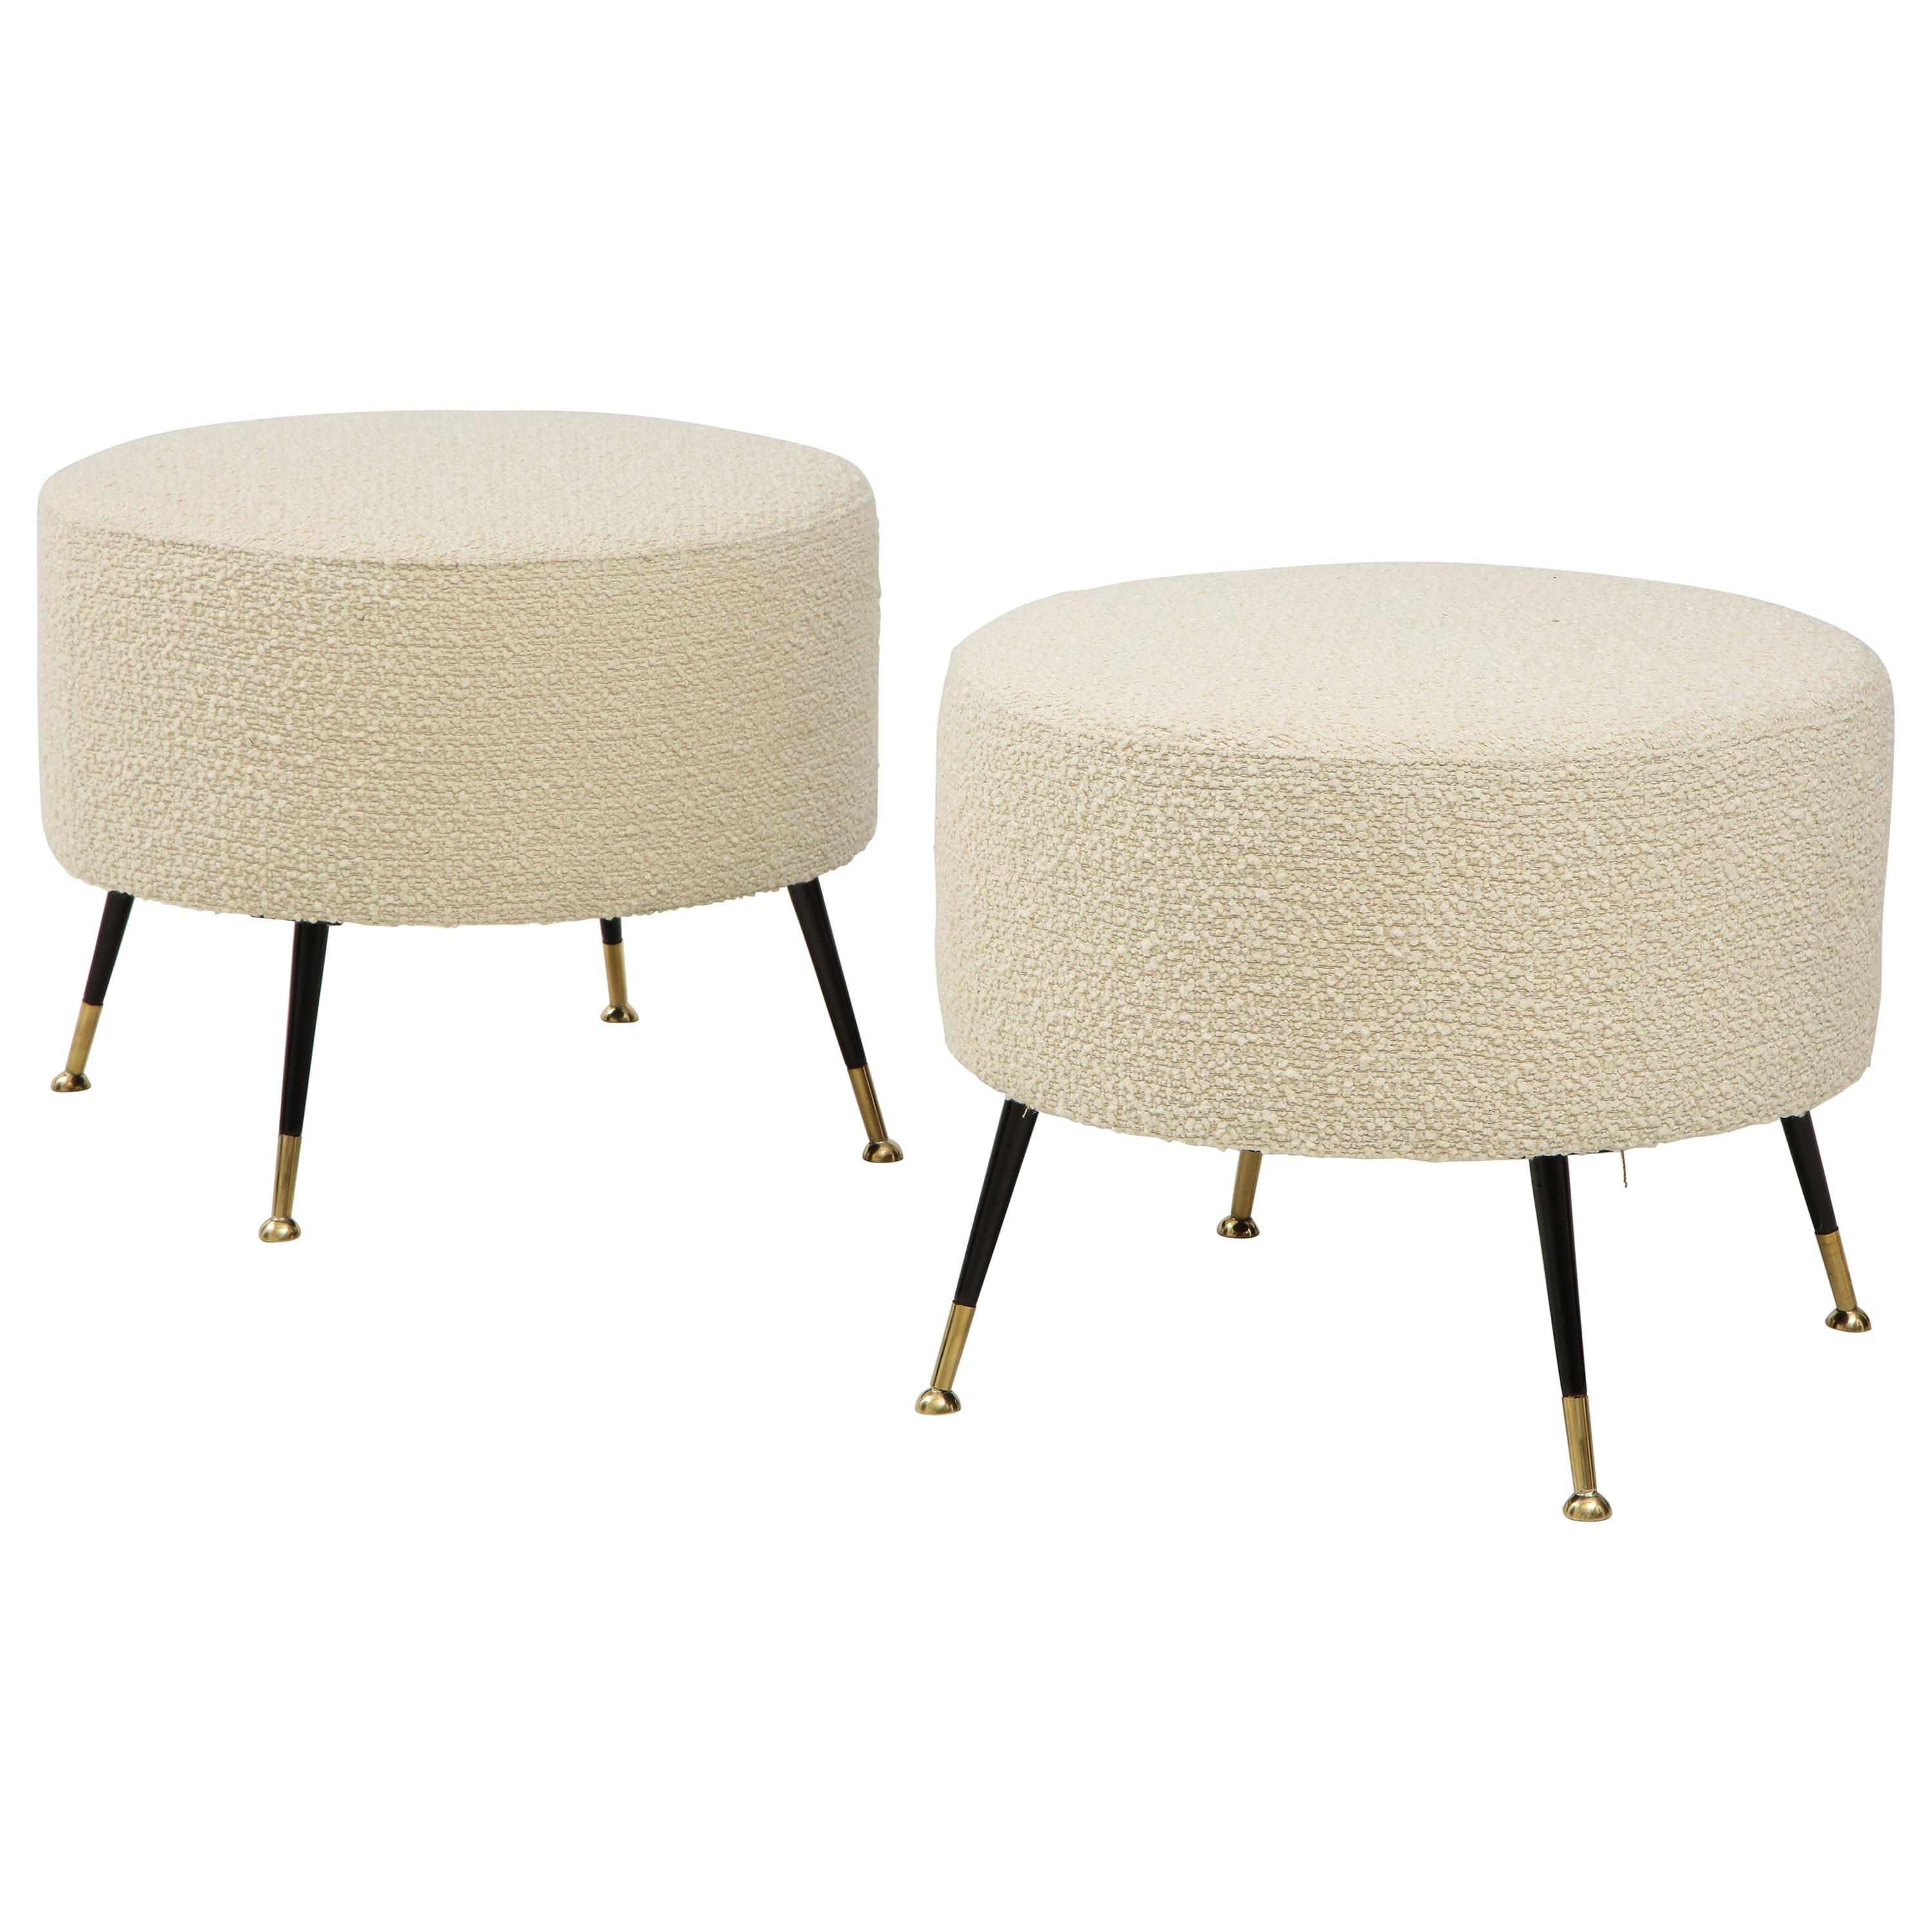 Pair of Round Stools or Poufs in Ivory Boucle Brass Legs, Italy, 2021